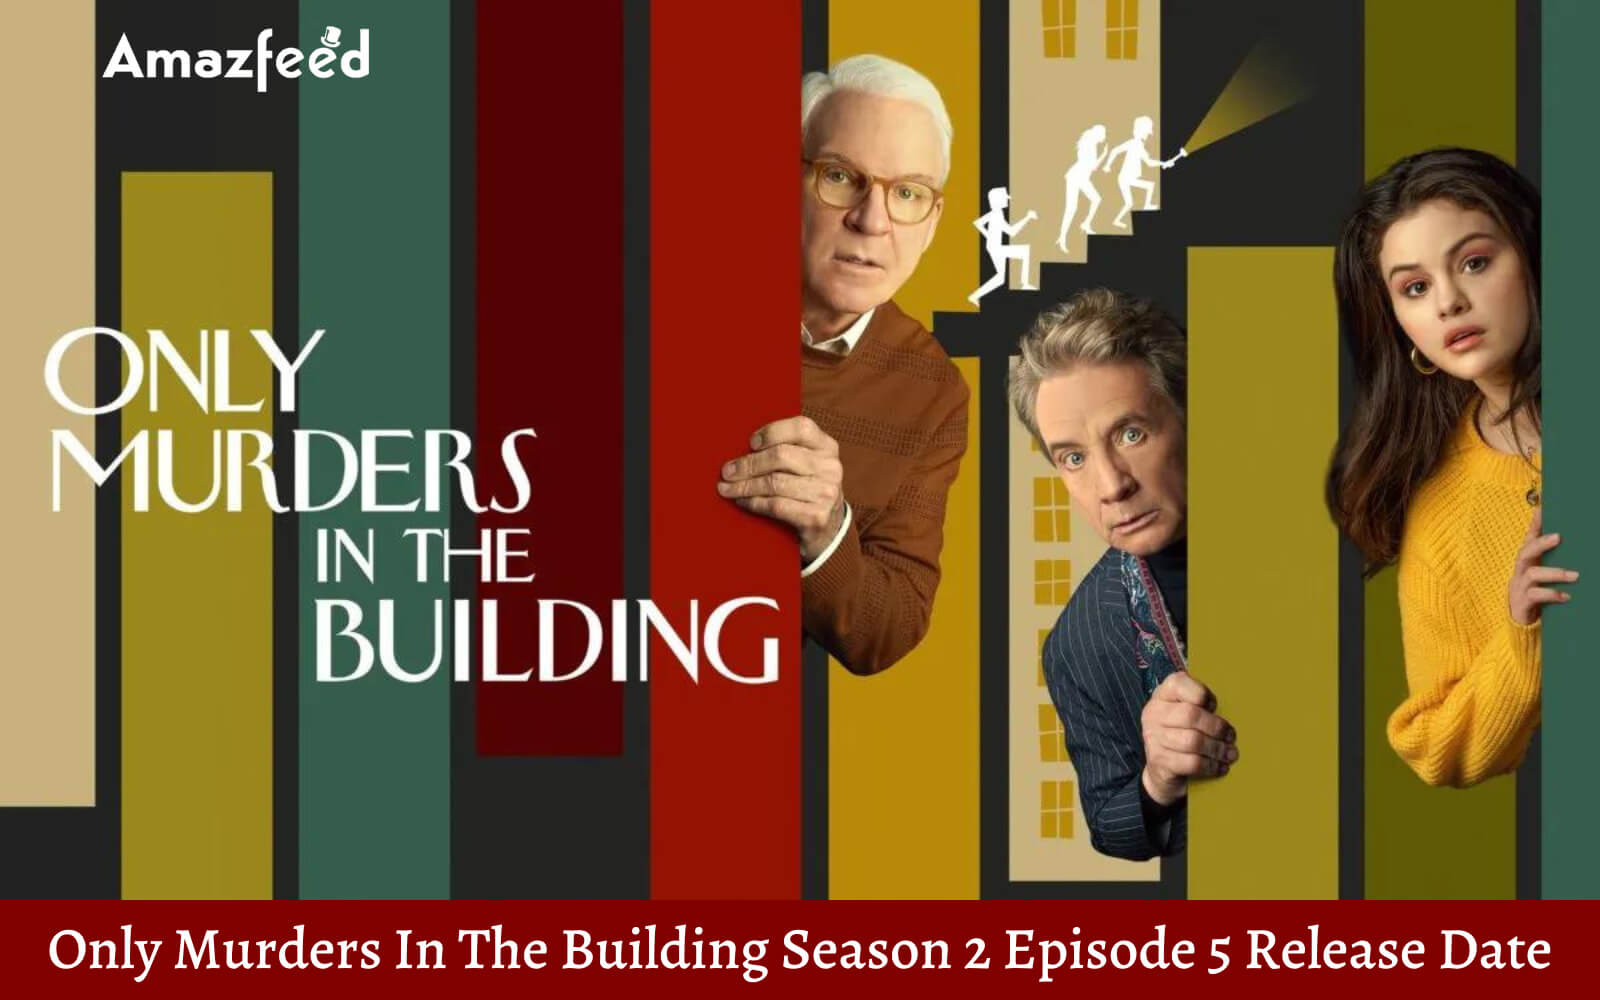 Only Murders In The Building Season 2 Episode 5 Release Date